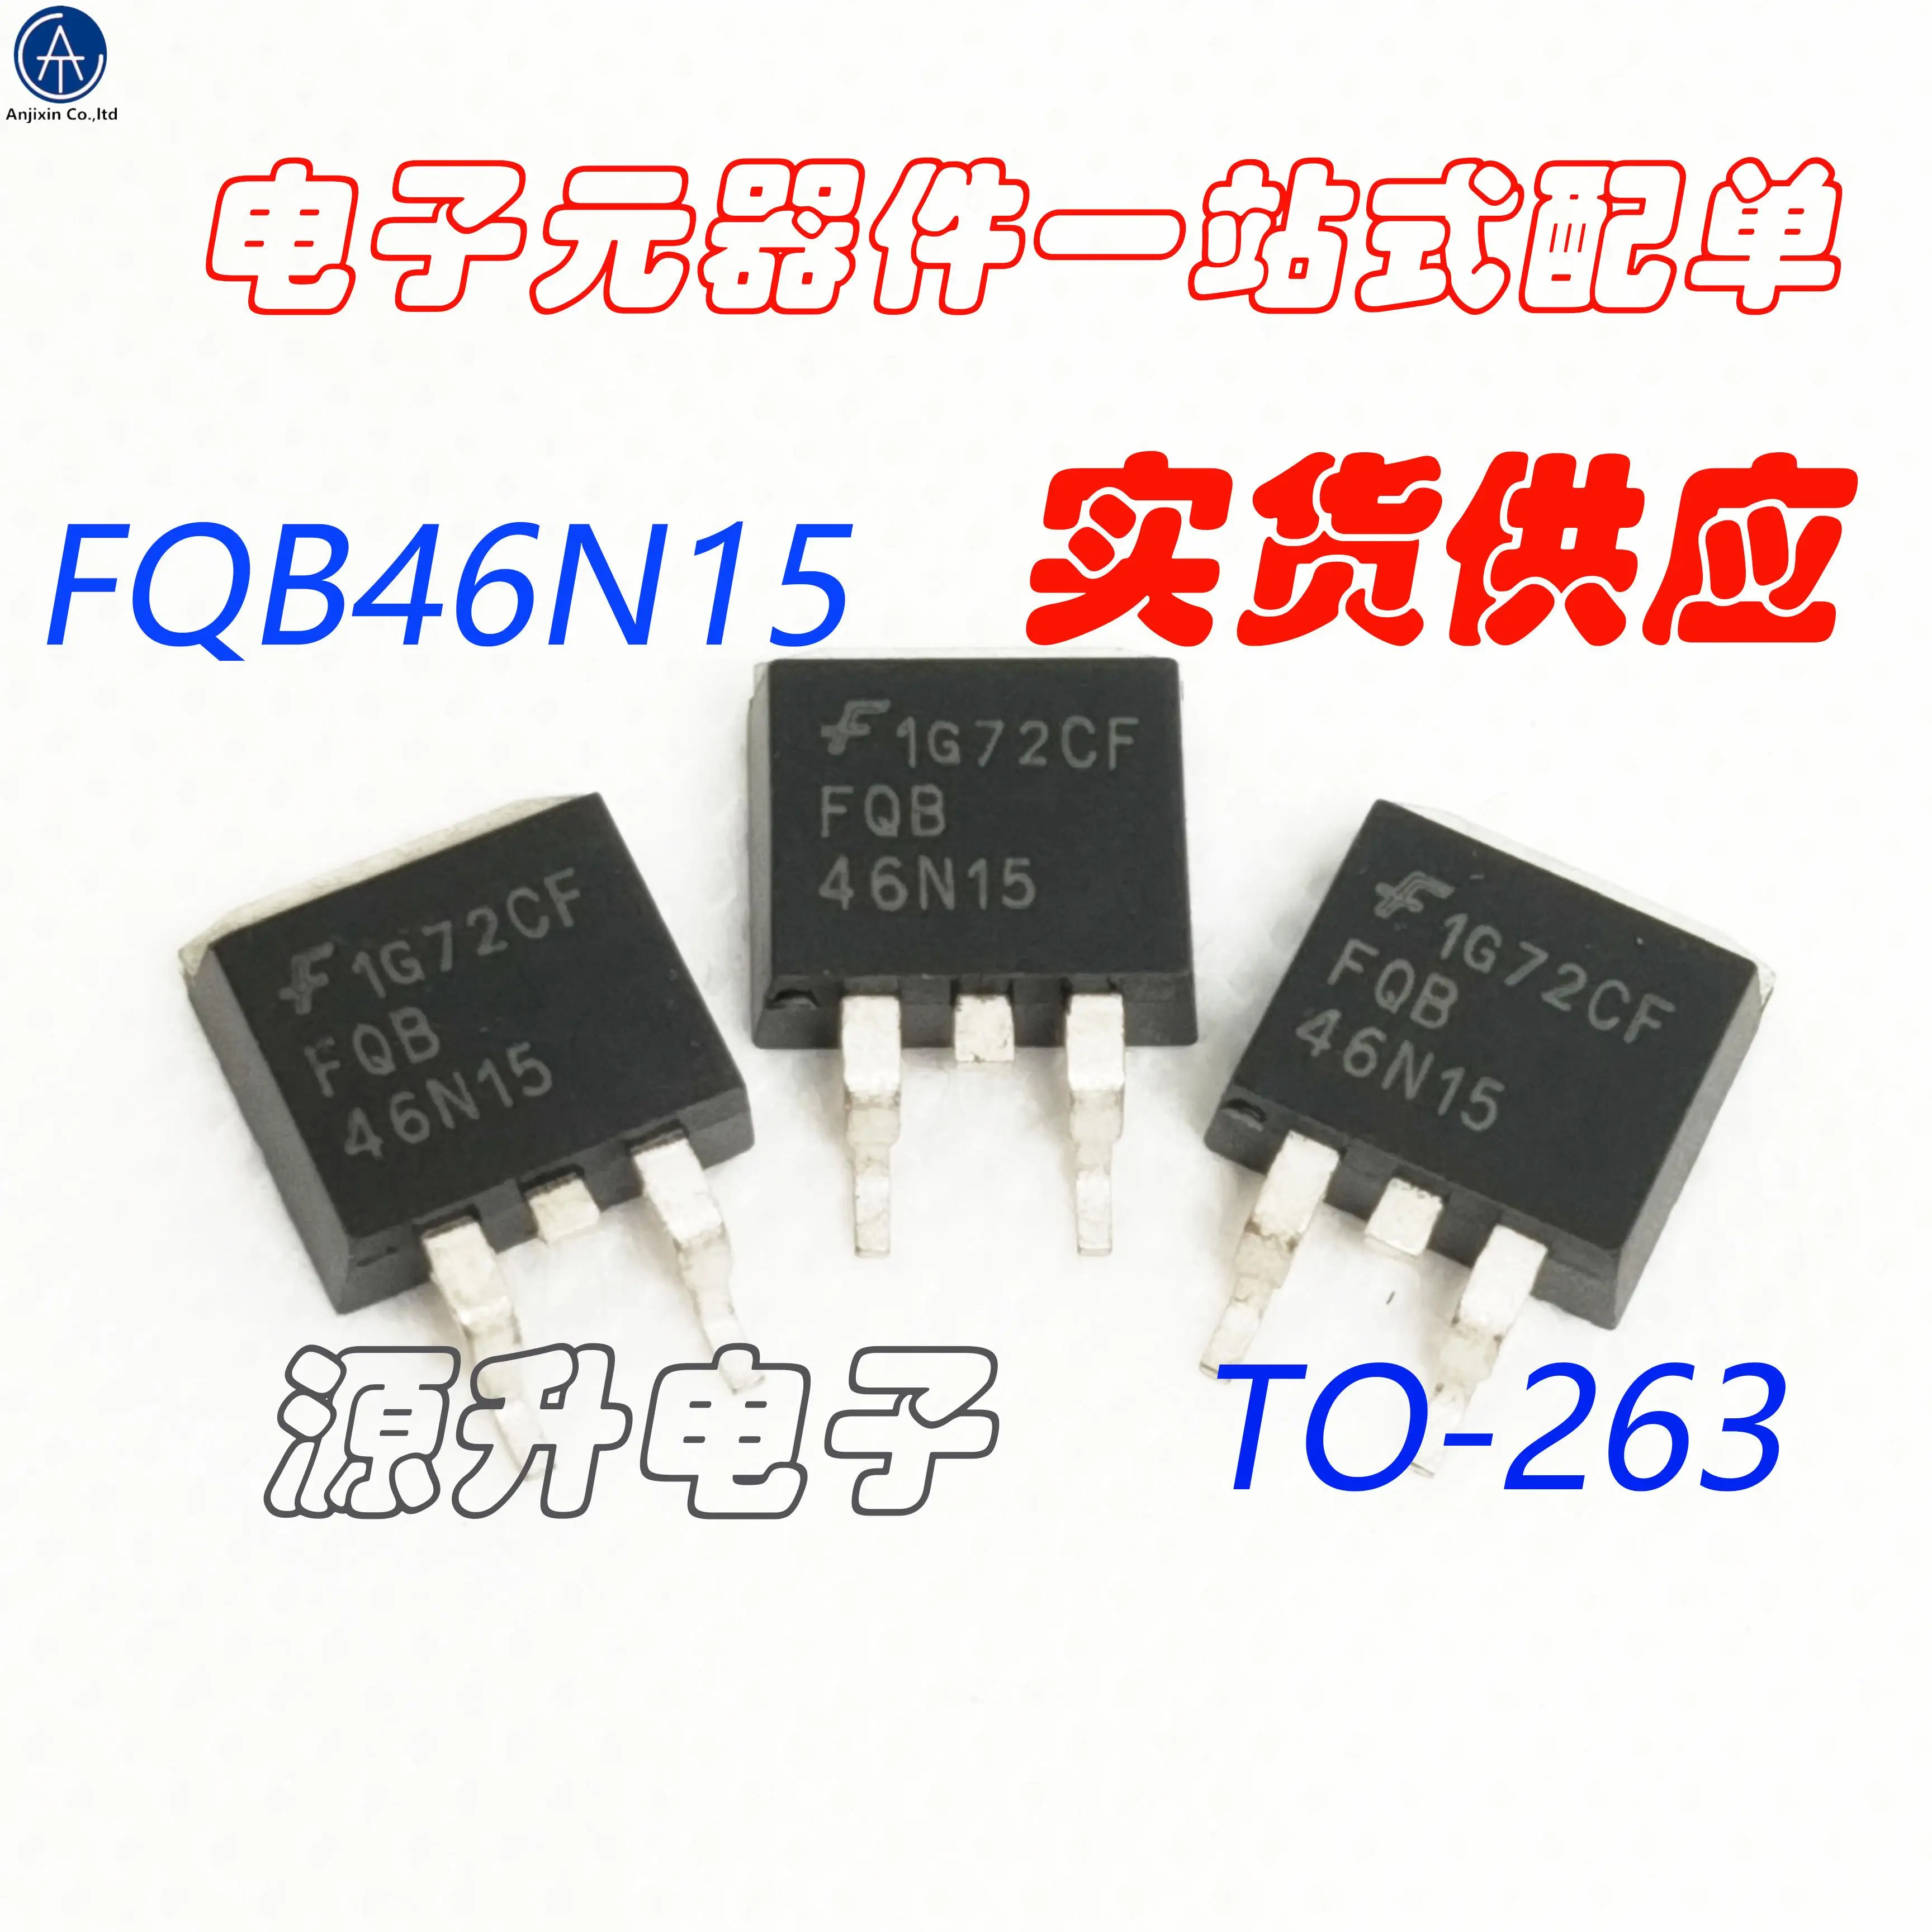 

20PCS 100% orginal new FQB46N15/46N15 LCD commonly used MOS tube patch TO-263